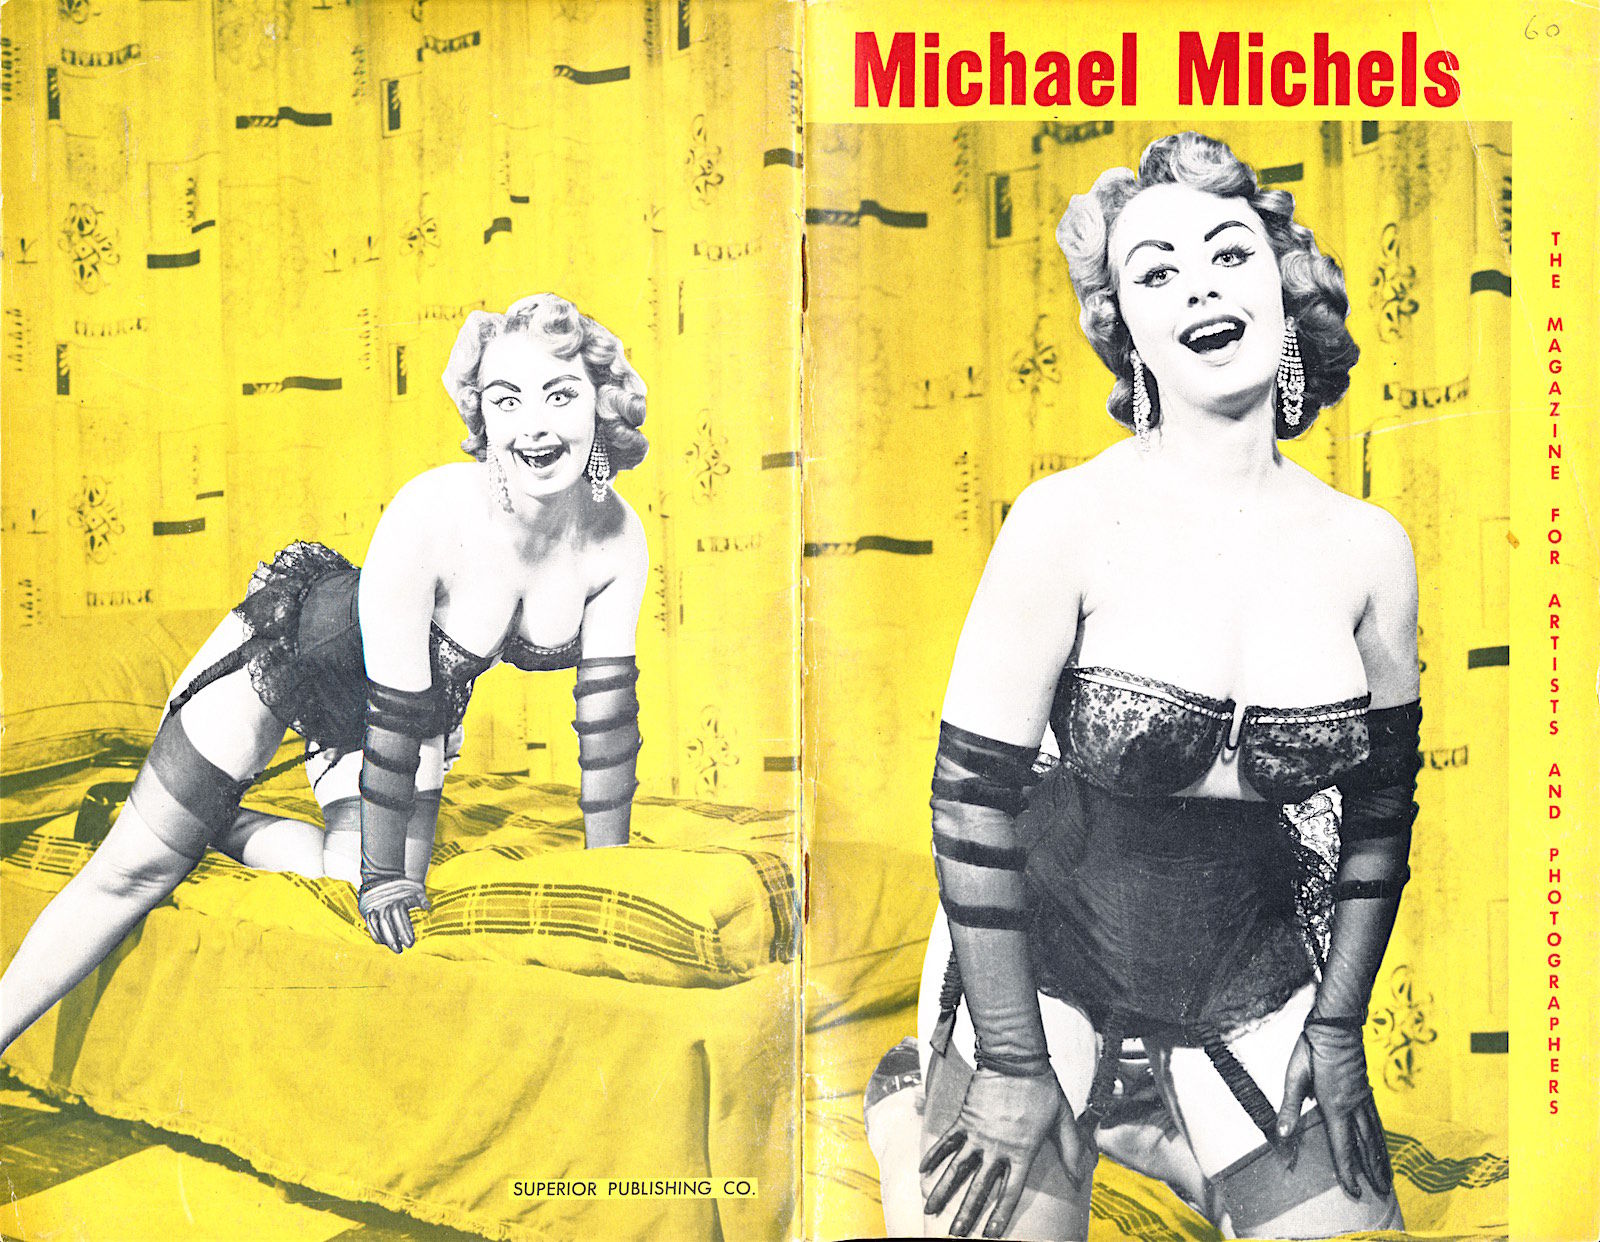 Michael Michels [Michel Michaels] (vintage pinup digest magazine, 1950s) de  Michels, Michael (featured): Very Good (1950) | Well-Stacked Books